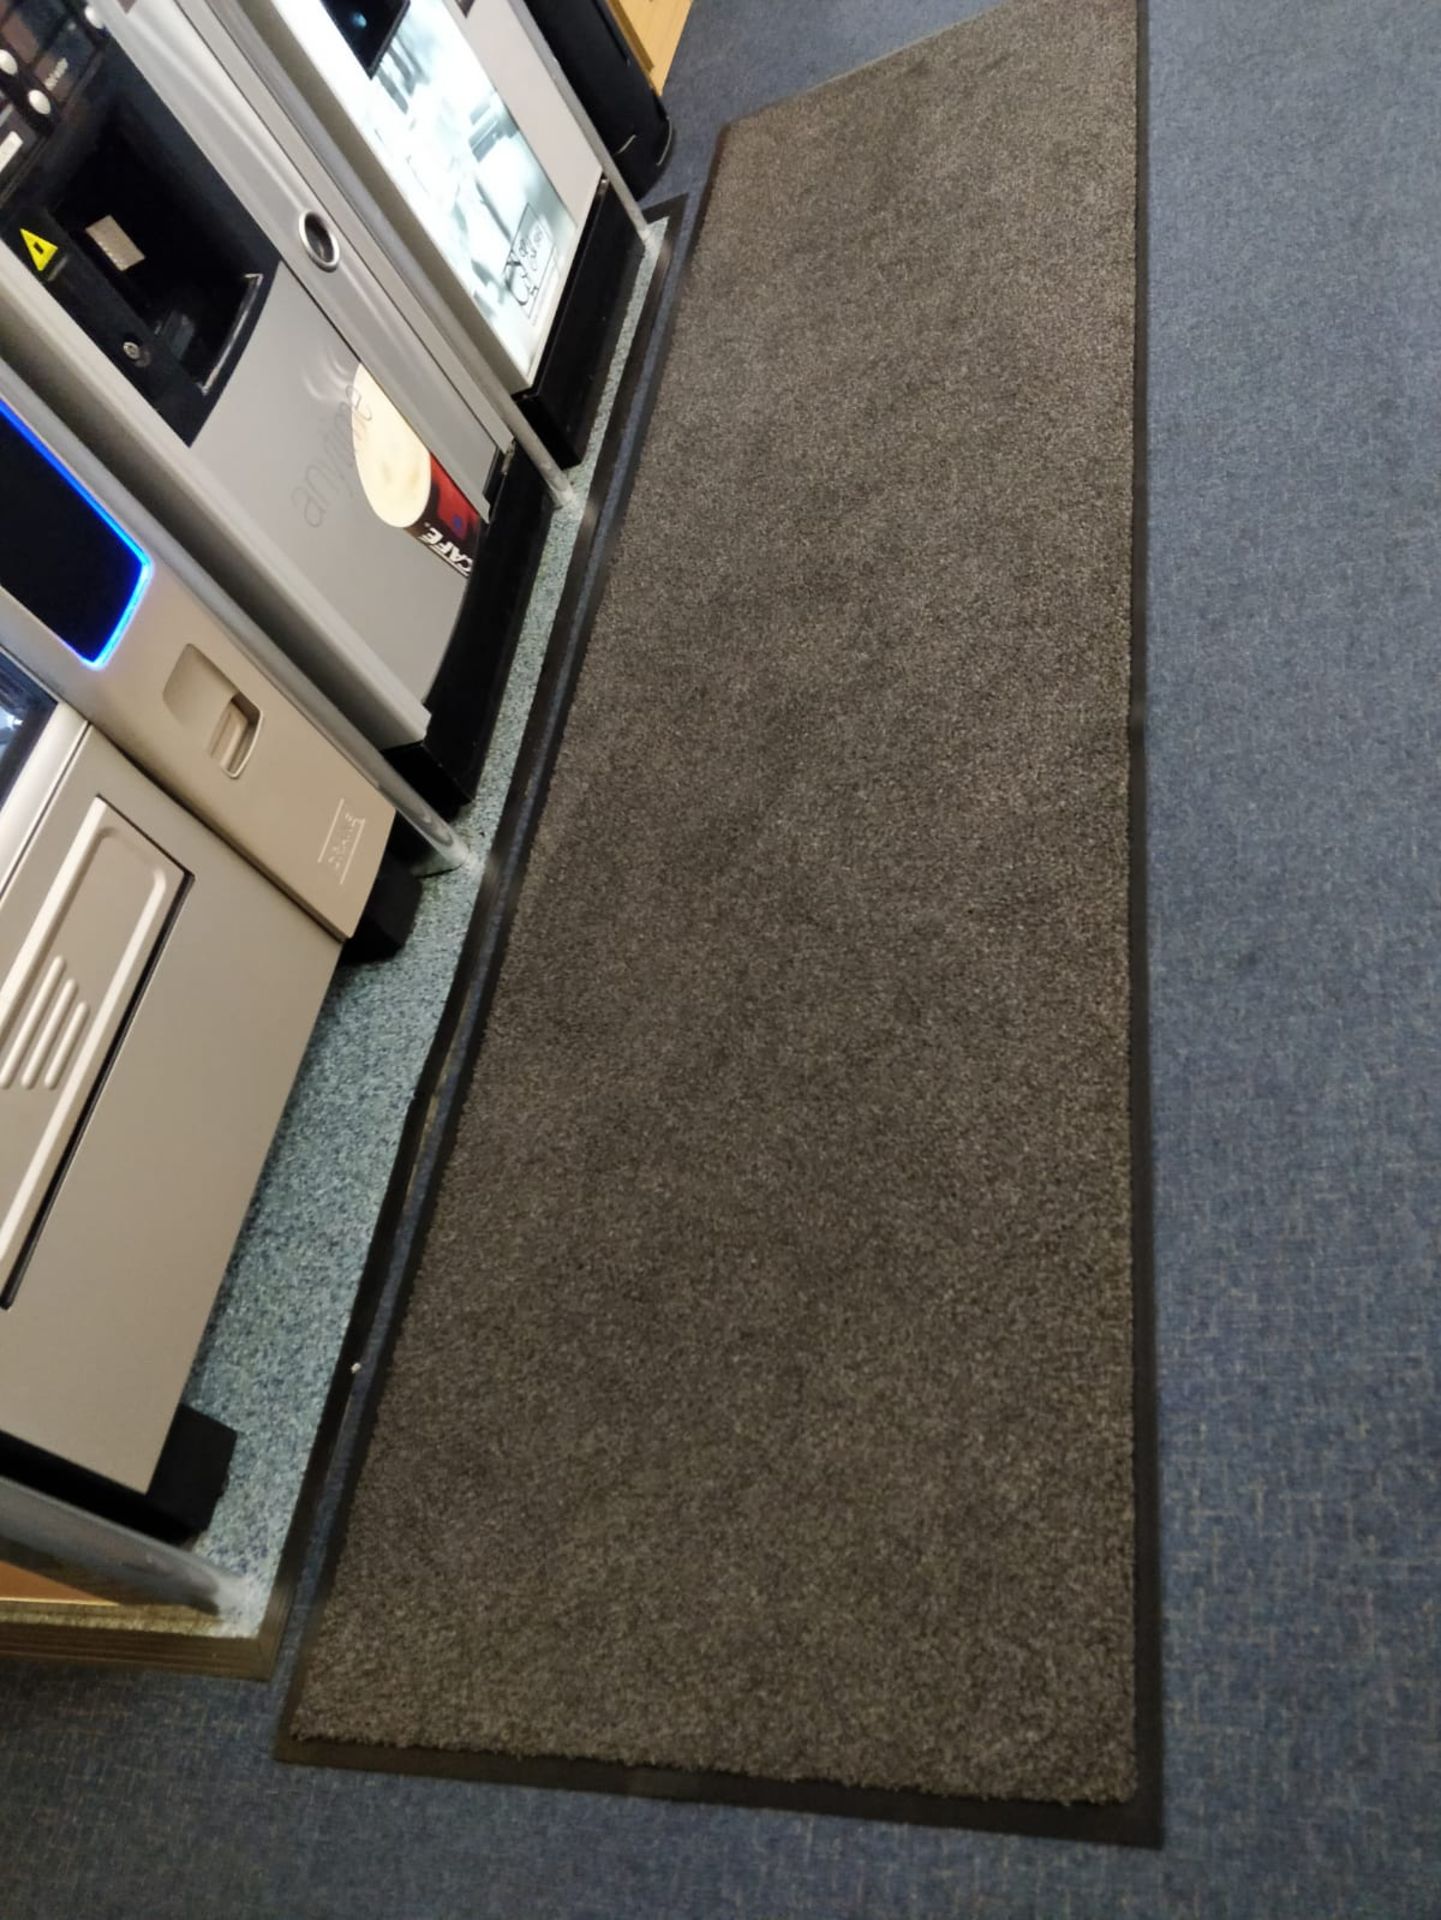 1 x Large Rubber Backed Floor Matt - Office Use Only - Approx Length 300cms Ref B1 - CL409 - - Image 2 of 2